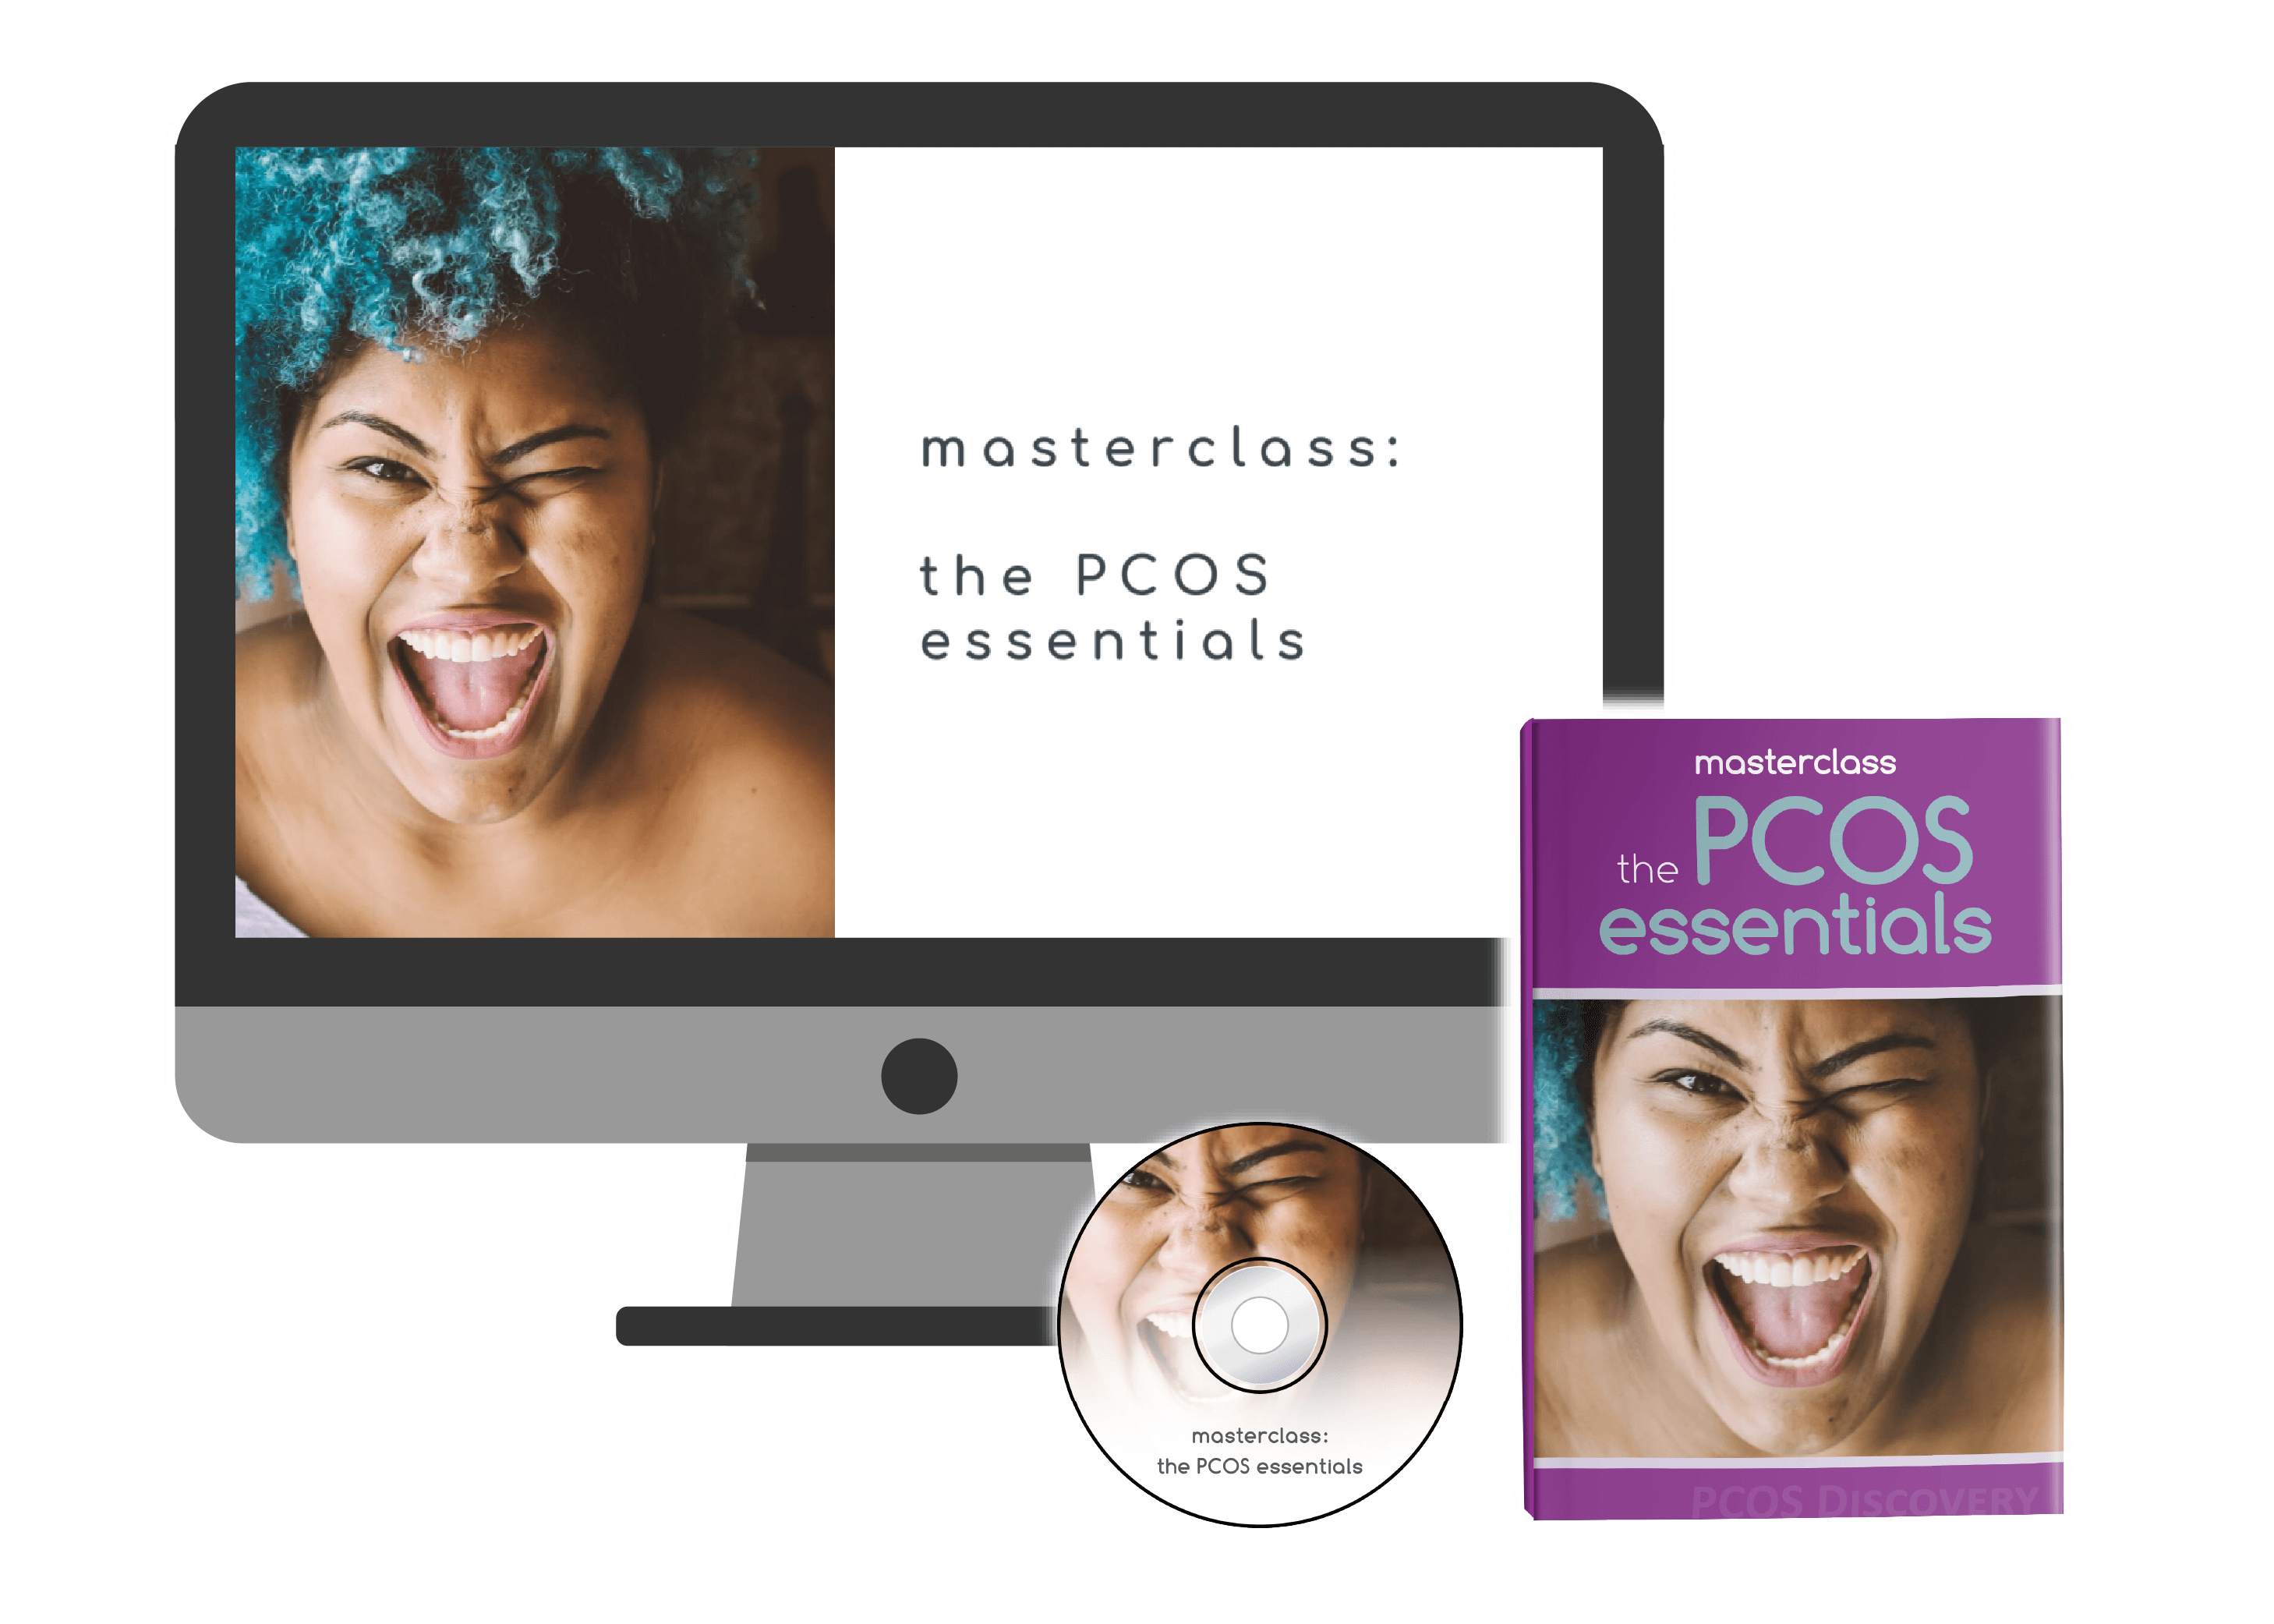 pcos diagnosis and masterclass